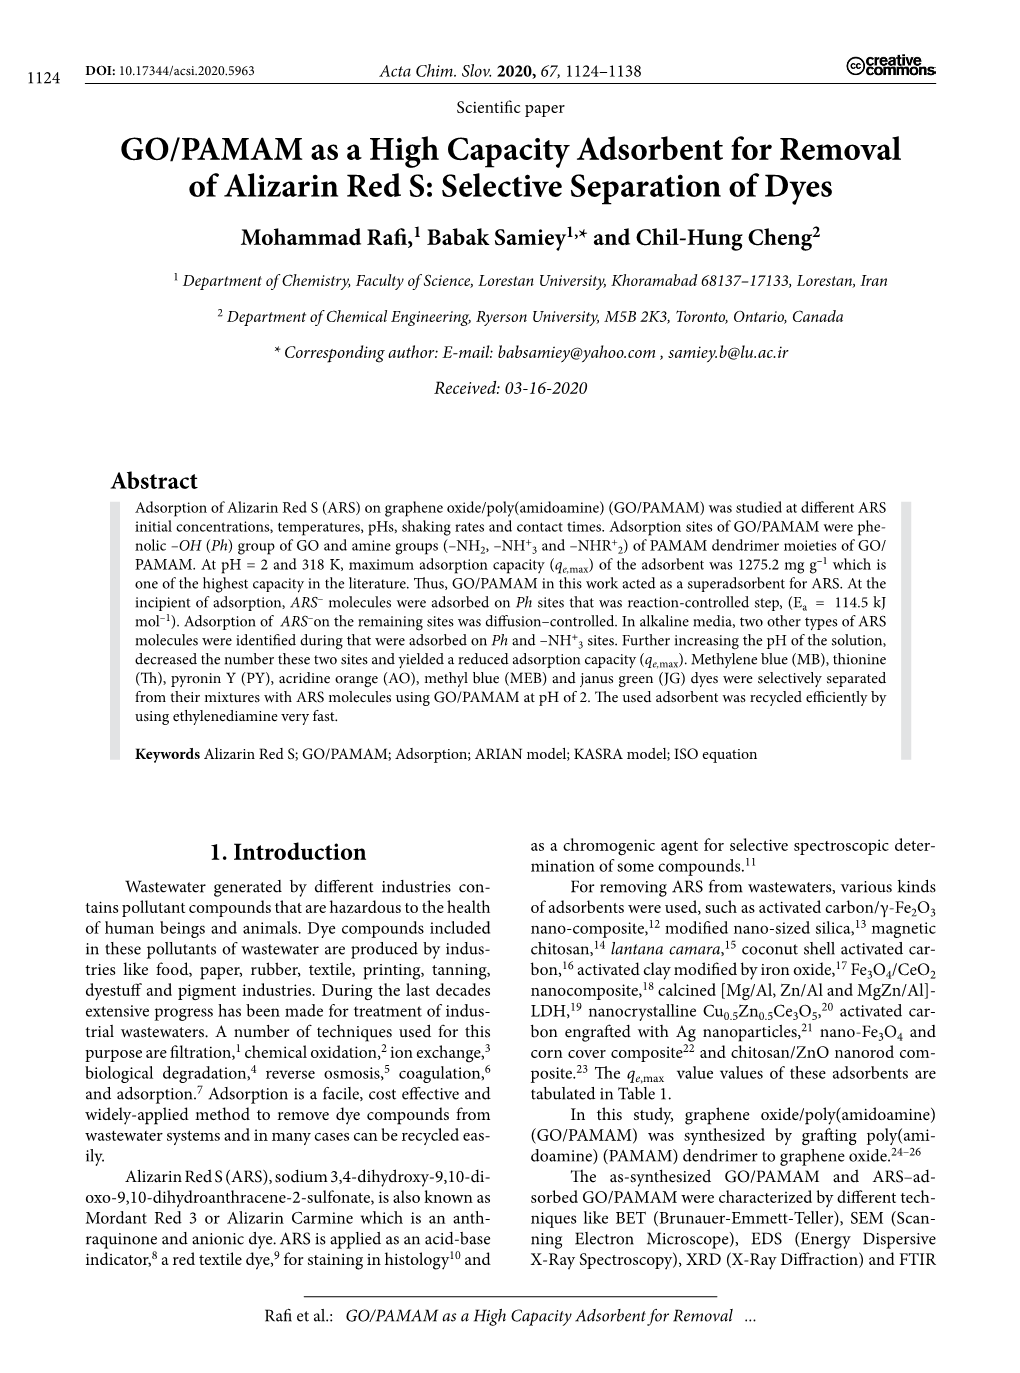 GO/PAMAM As a High Capacity Adsorbent for Removal of Alizarin Red S: Selective Separation of Dyes Mohammad Rafi,1 Babak Samiey1,* and Chil-Hung Cheng2